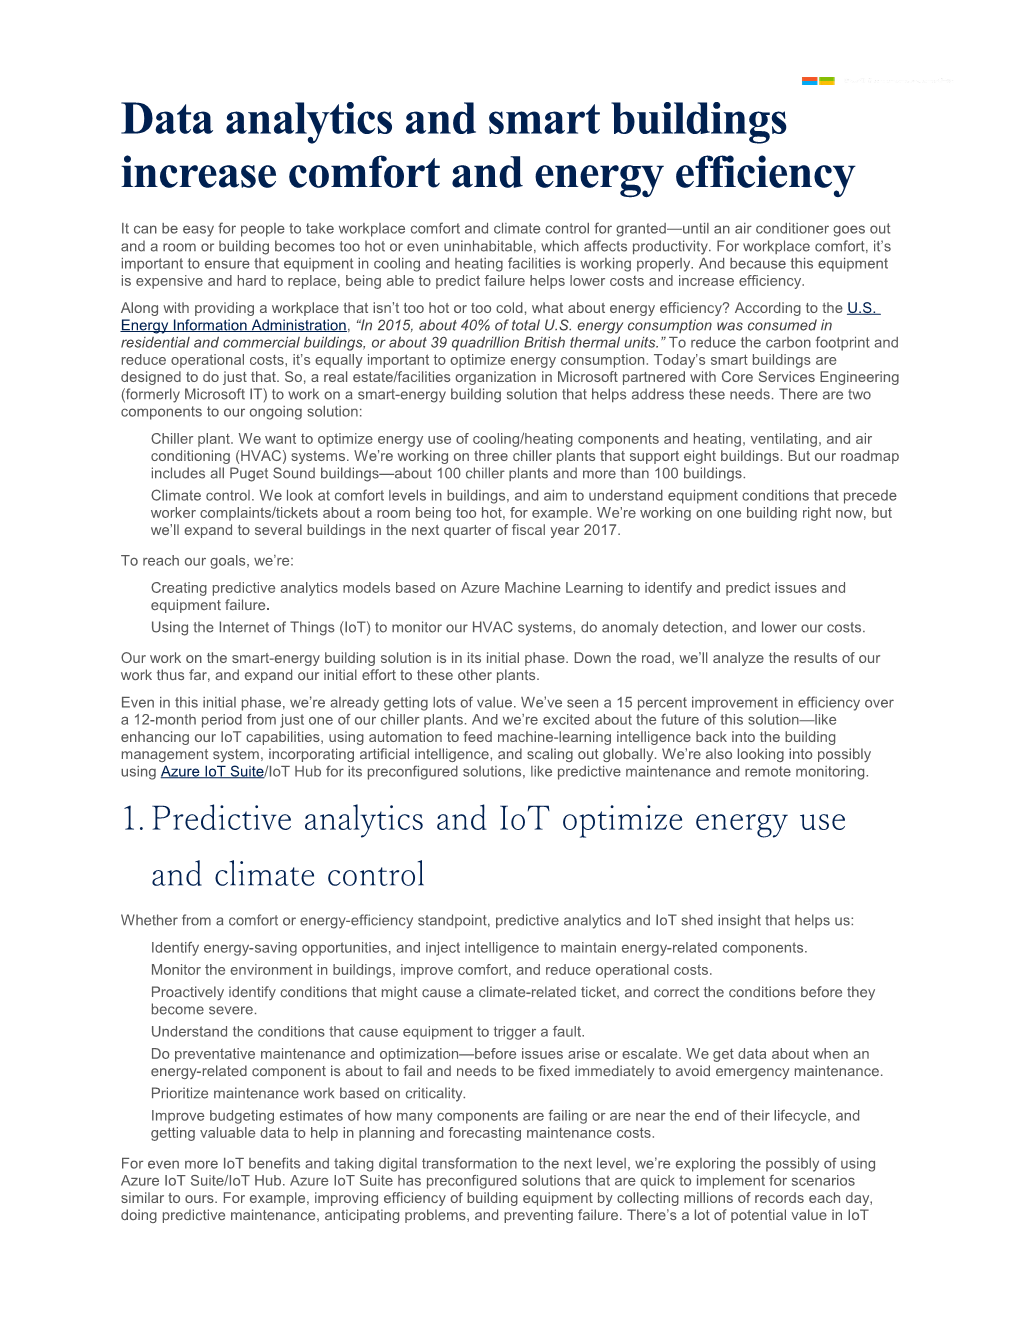 Data Analytics and Smart Buildings Increase Comfort and Energy Efficiency